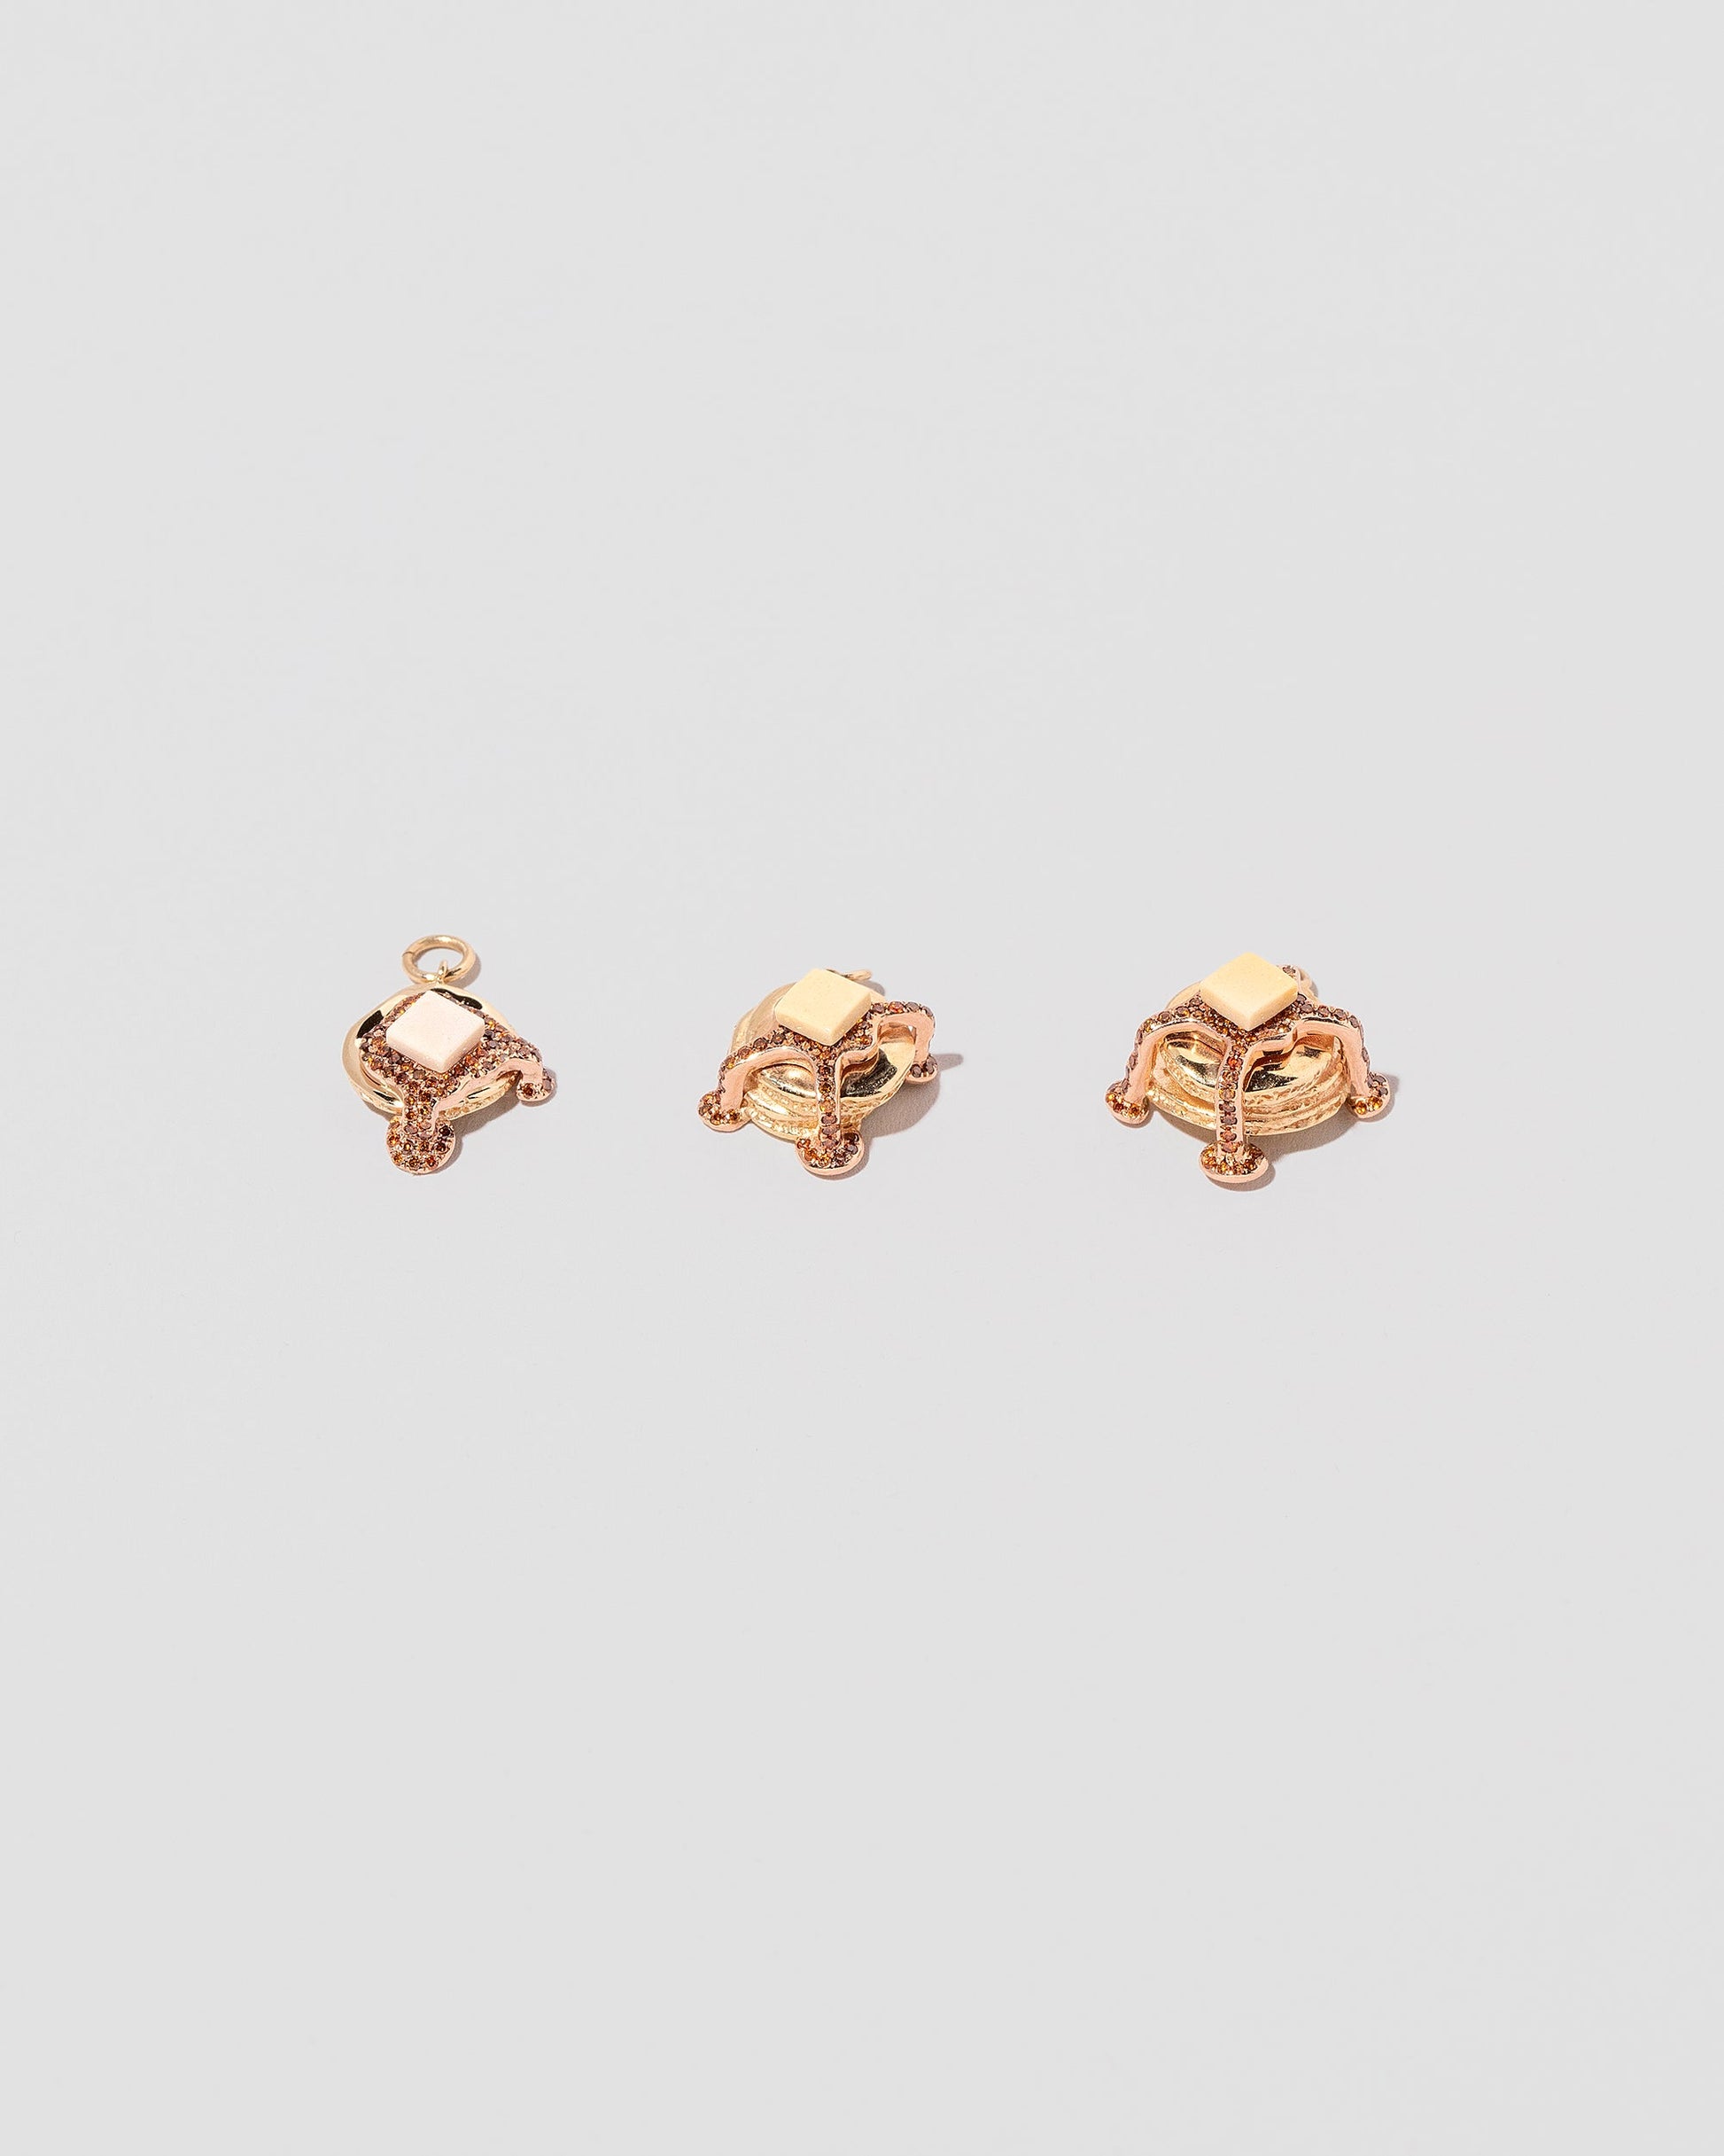 Group of Pancake Charms on light color background.